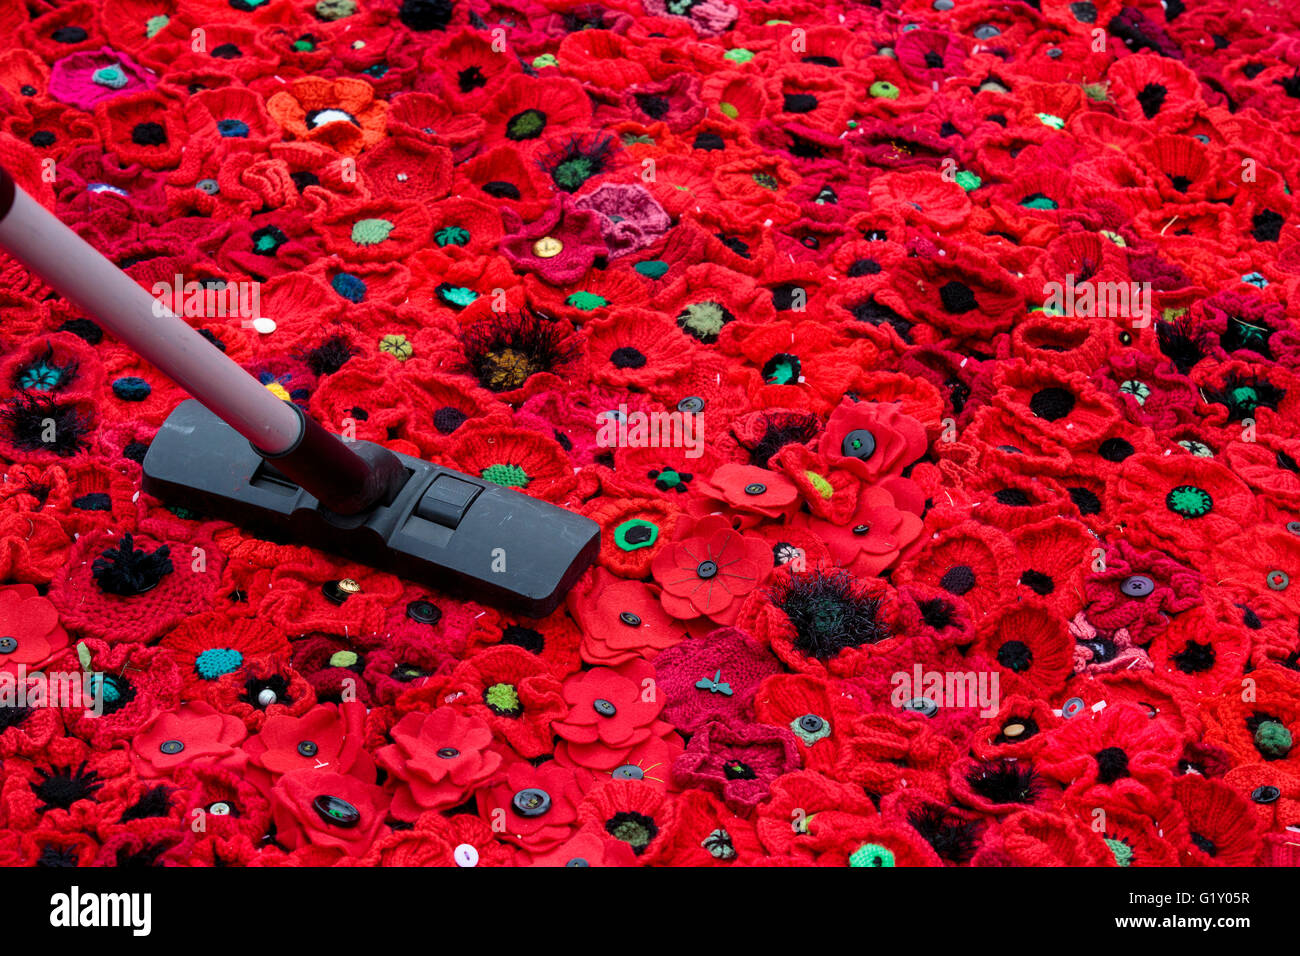 London, UK. 20 May 2016. Volunteers prepare the 5000 Poppies Project at RHS Chelsea Flower Show. The poppy display honours all servicemen and women who have fought across all wars, conflicts and peacekeeping operations over the last 100 years. More than 300,000 handcrafted poppies were made by 50,000 contributors across the globe . Founded by Verena Tucker and Sara Davies, the handcrafted poppies raise funds for the Royal British Legion Poppy Appeal. The display will be in place for the duration of the 2016 Chelsea Flower Show. Credit:  Vibrant Pictures/Alamy Live News Stock Photo